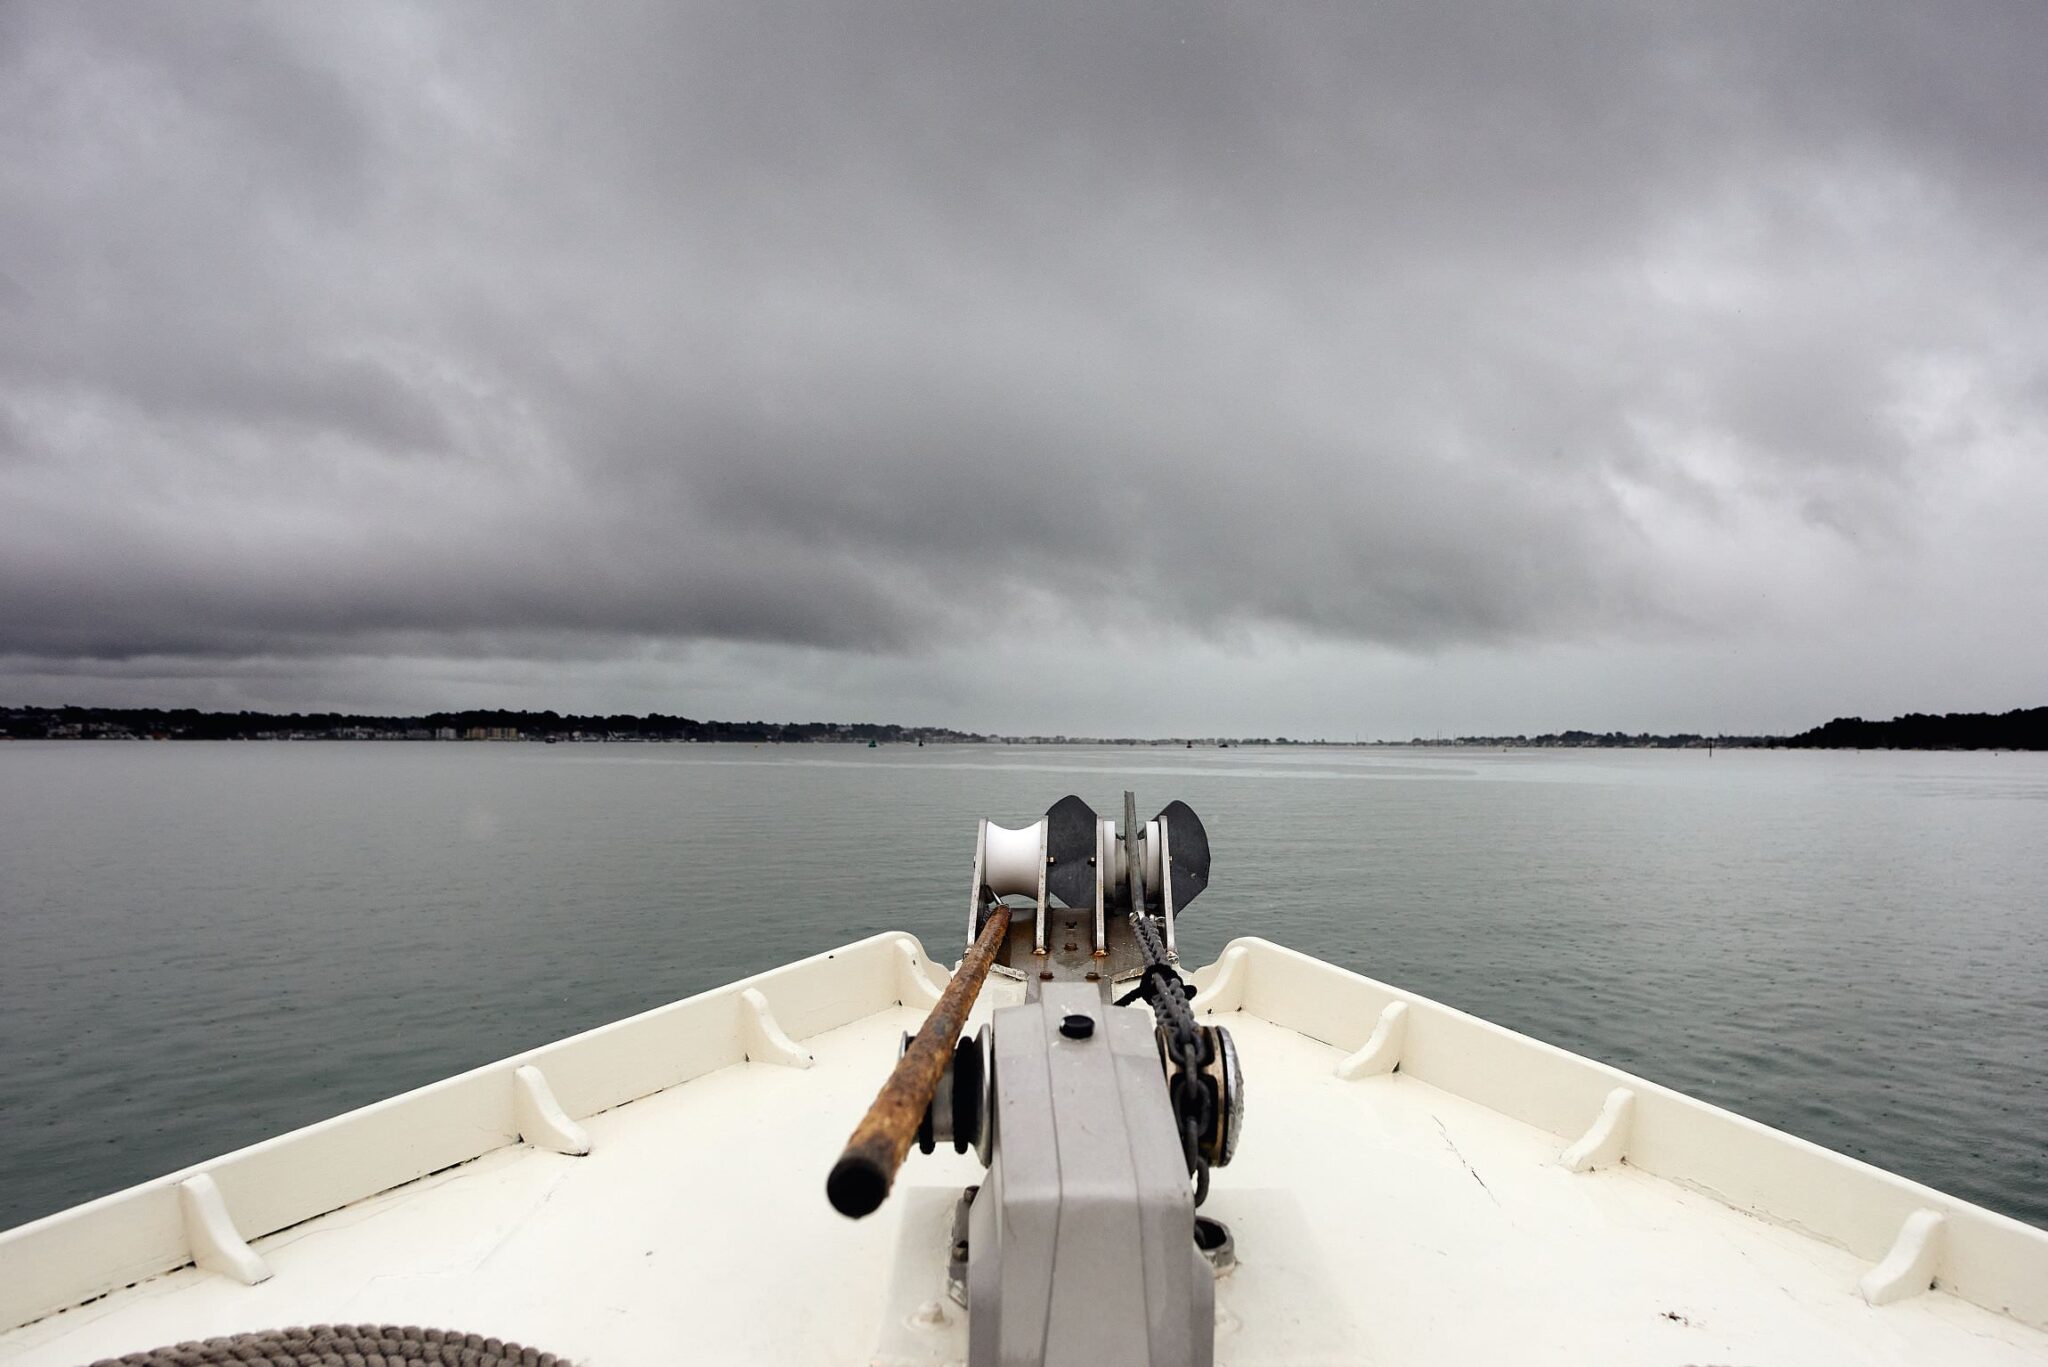 The view from the Dorset Queen across Poole harbour